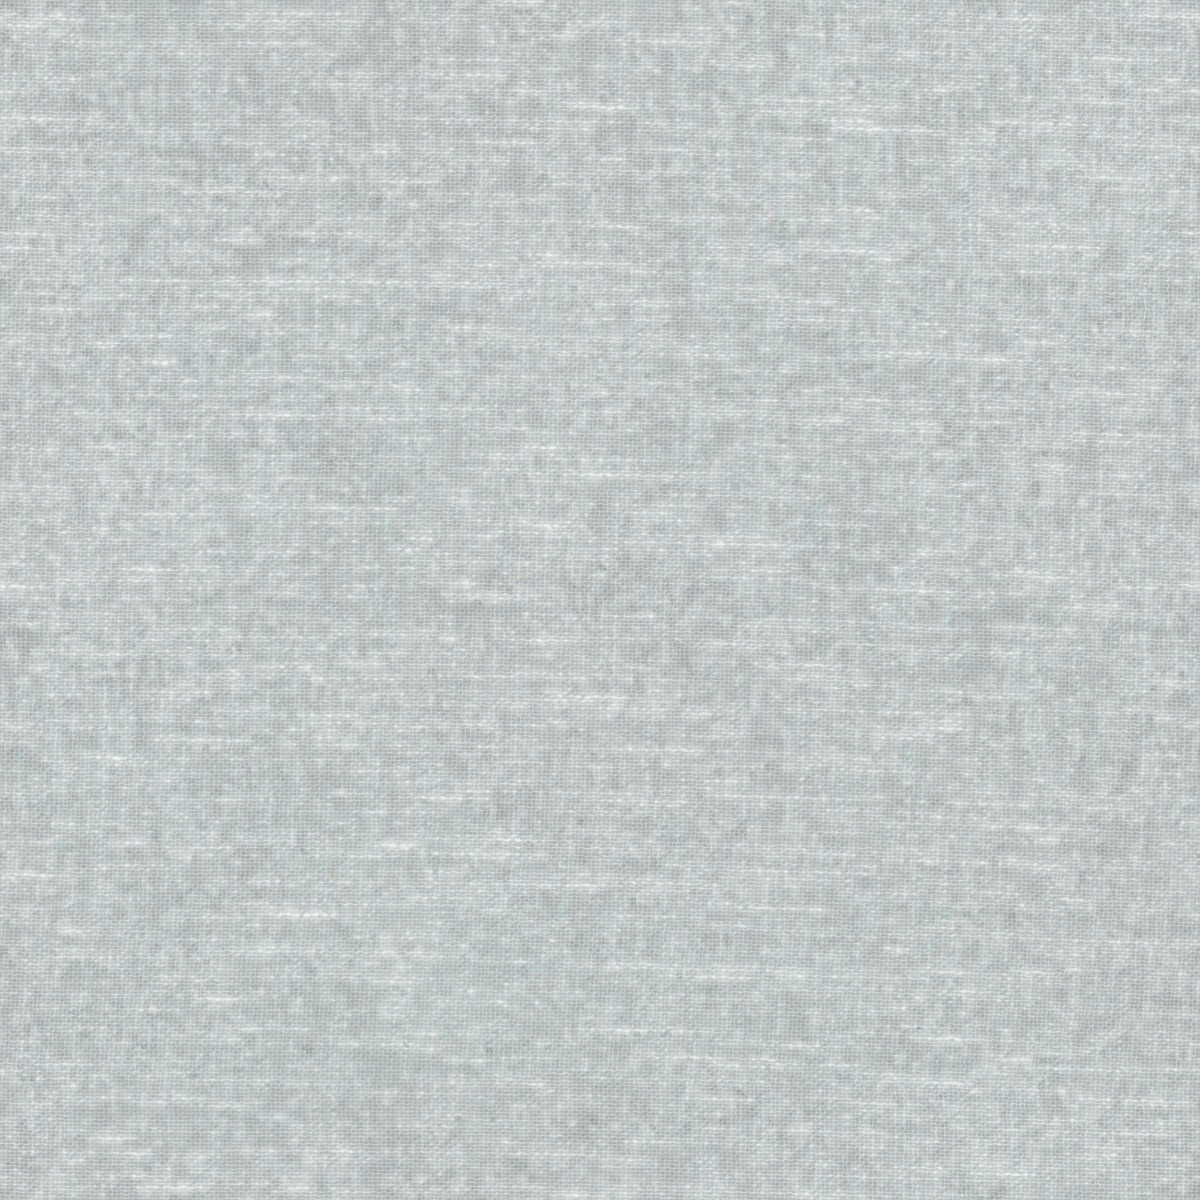 A seamless fabric texture with plain blue sheer units arranged in a None pattern